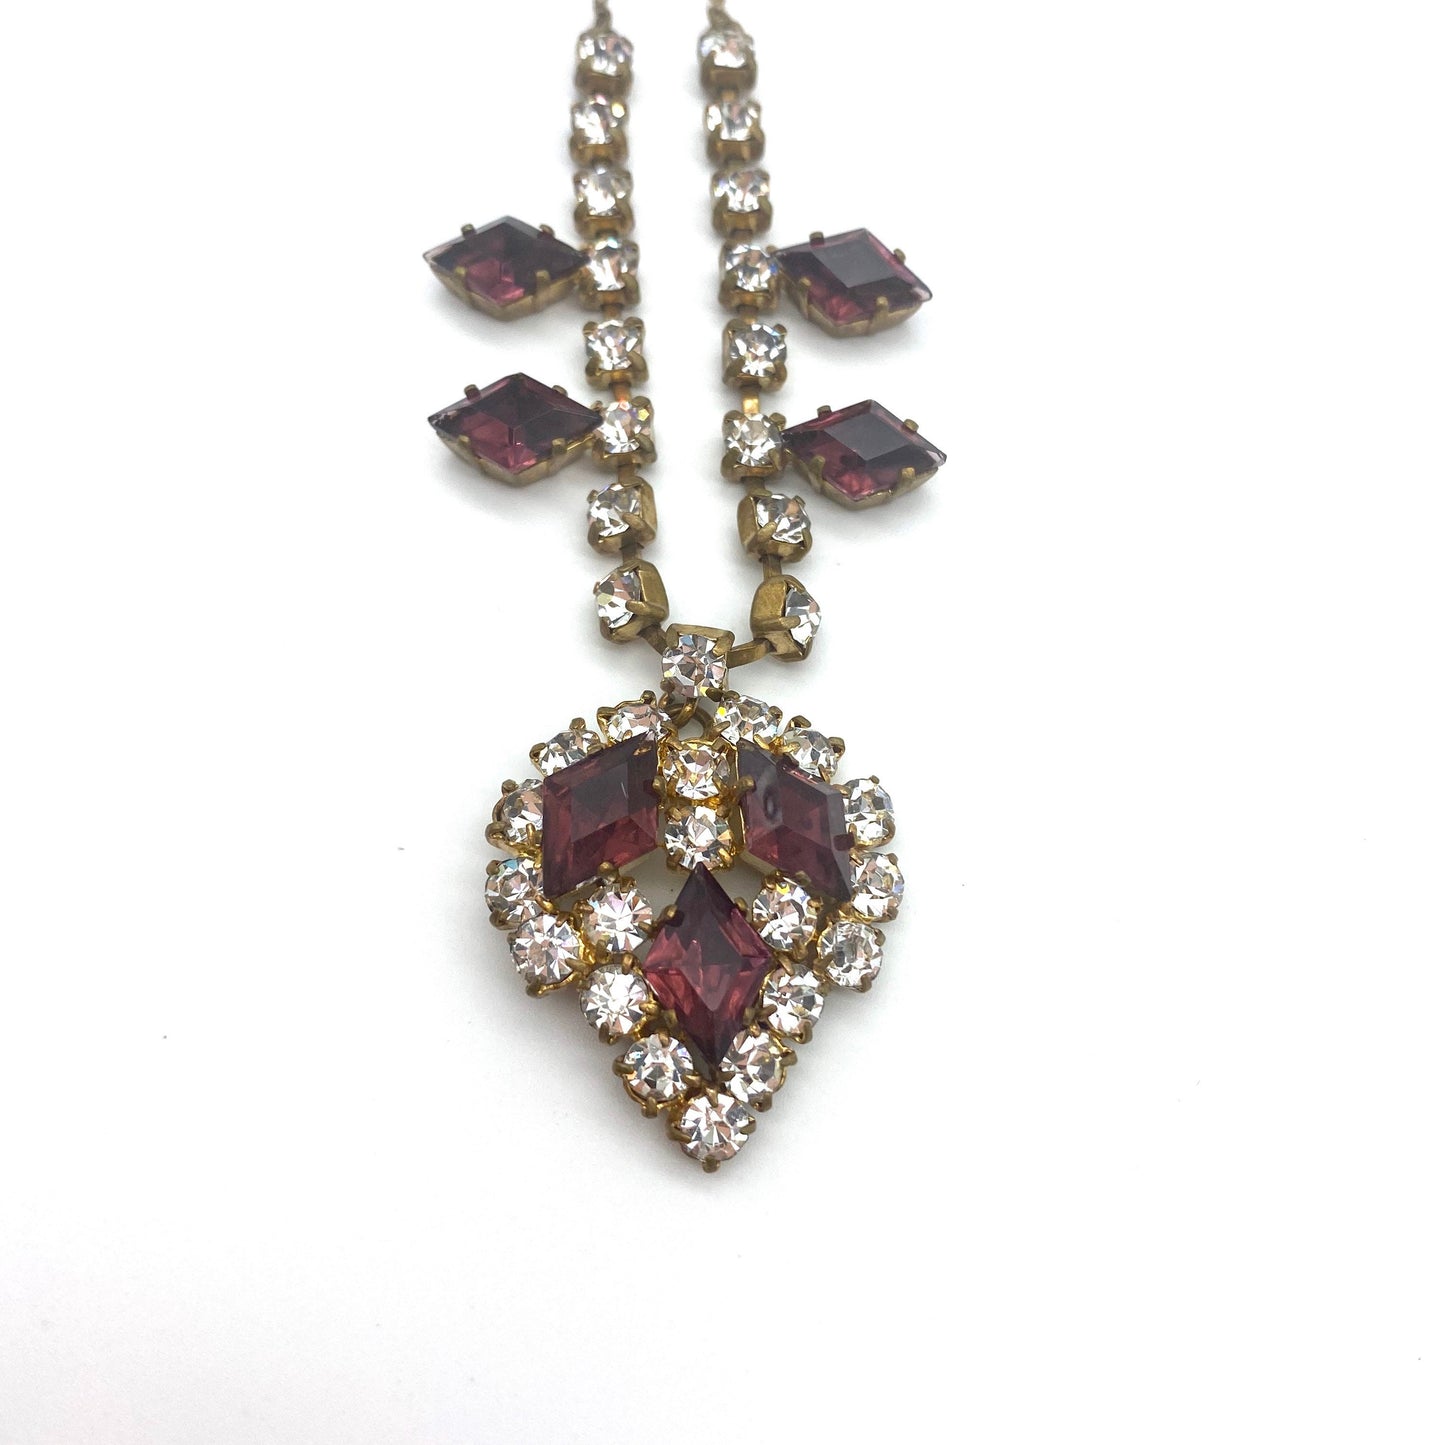 1950's Rhinestone Necklace with Claw Set Aubergine and Clear Rhinestones